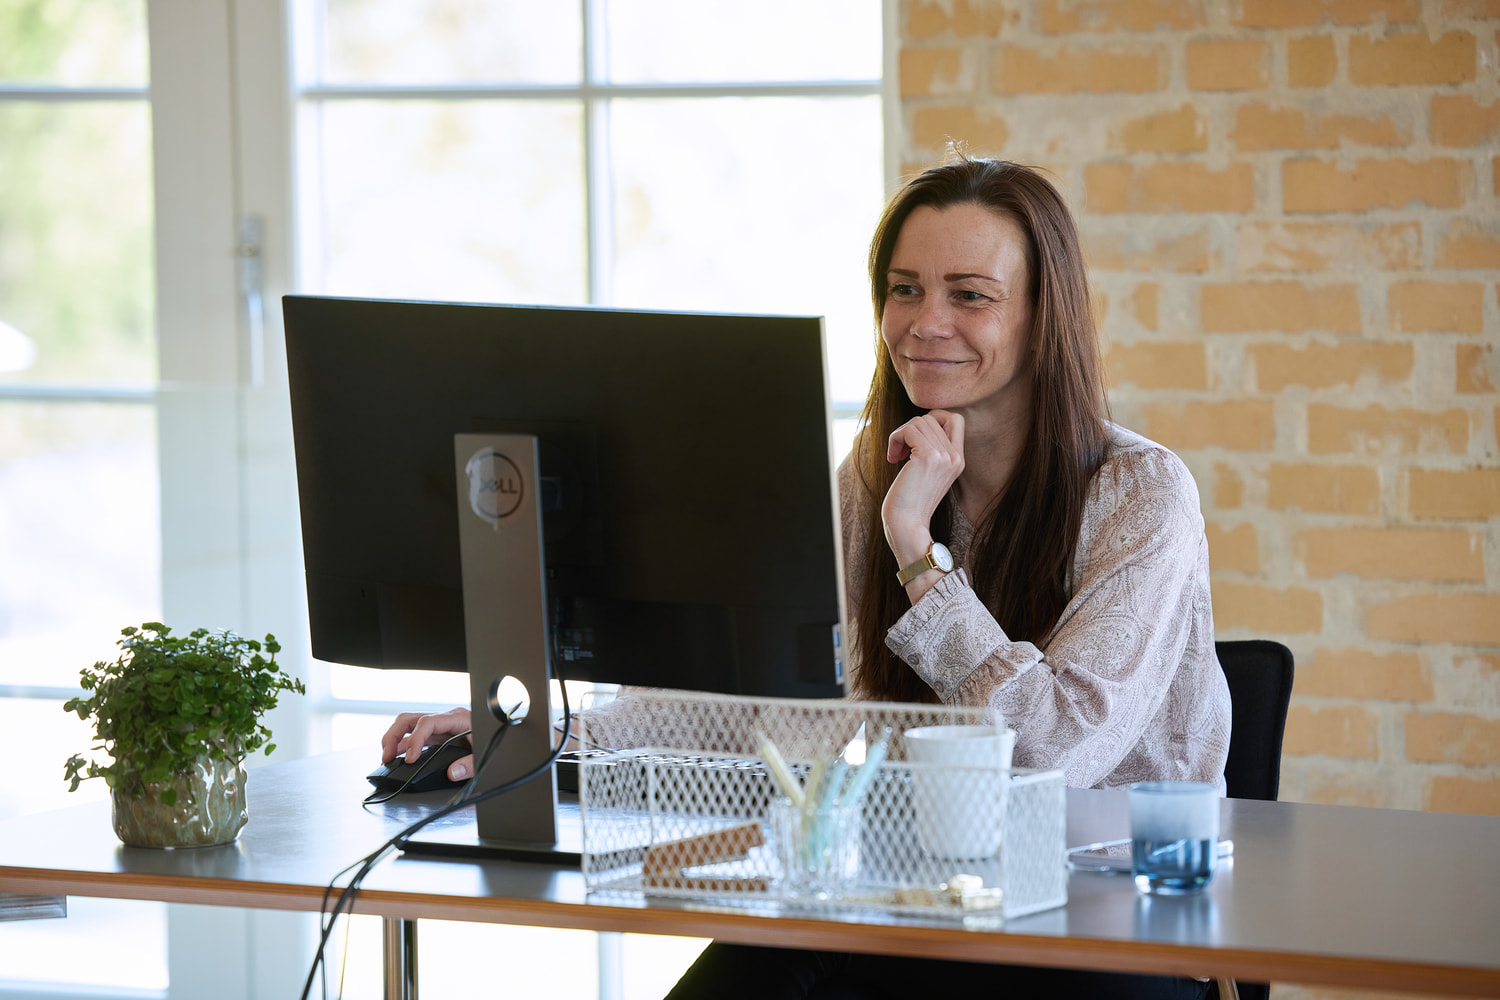 A woman is sitting at a desk with a computer and working while she is smiling.